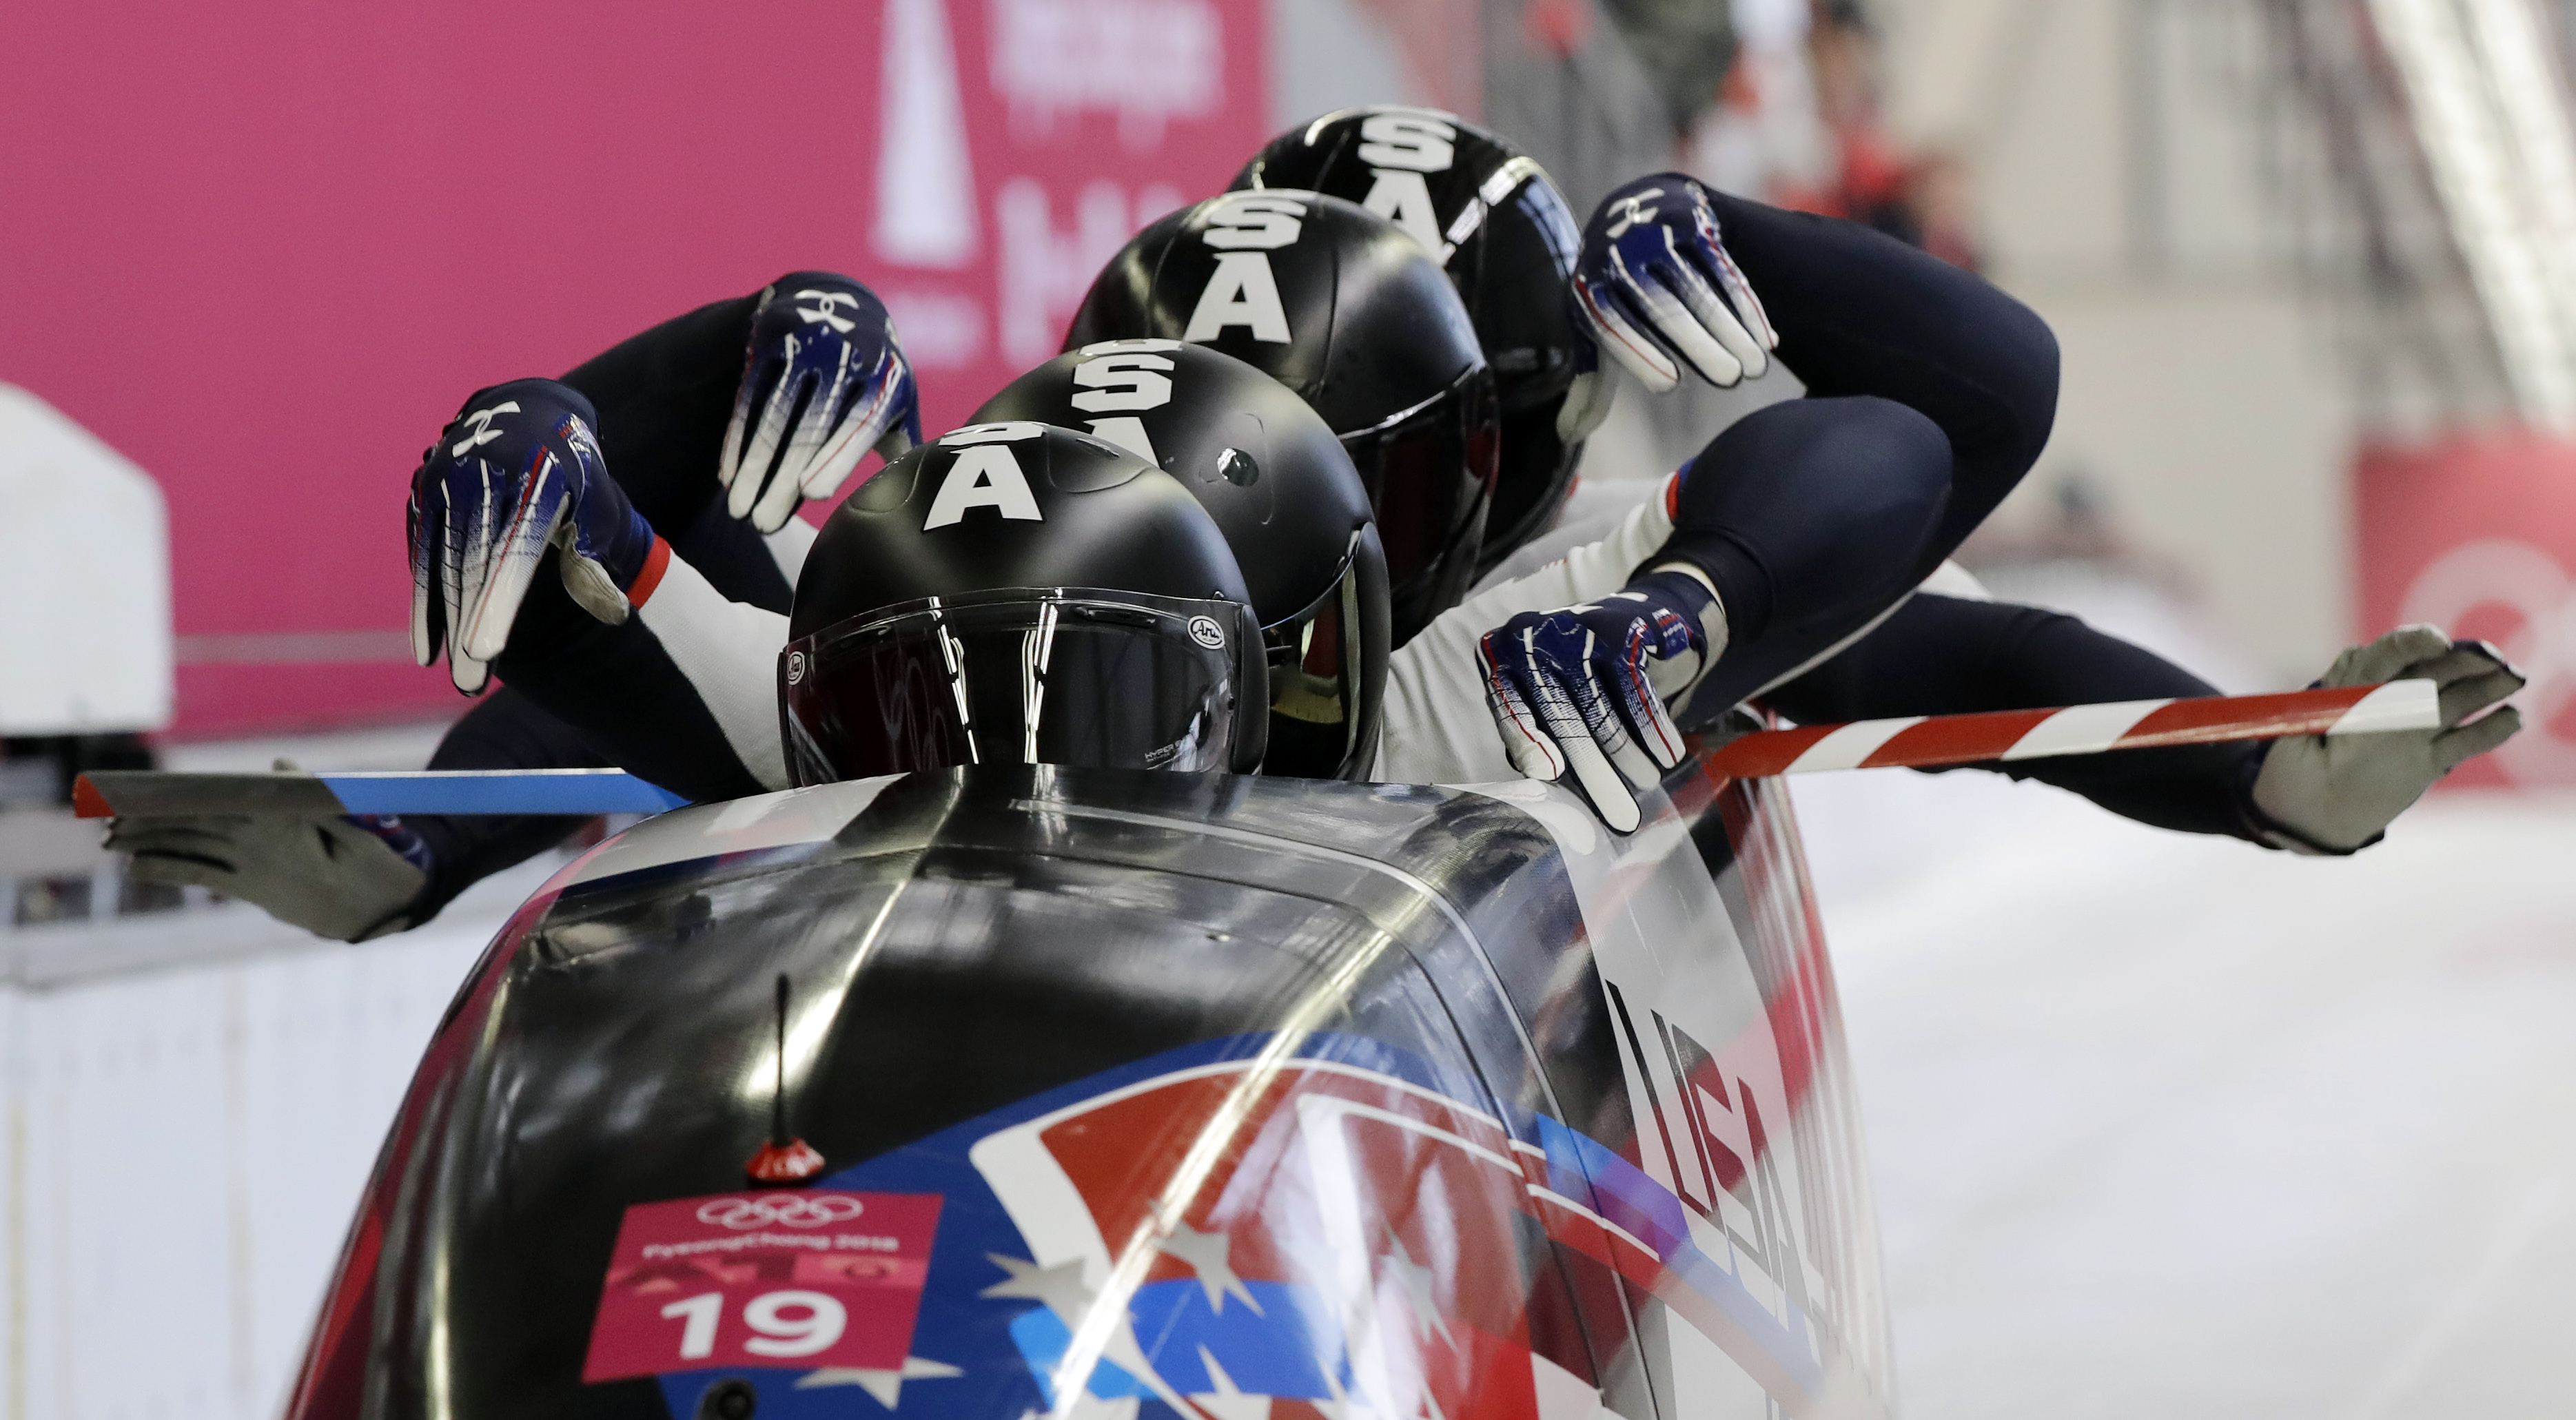 olympic bobsled